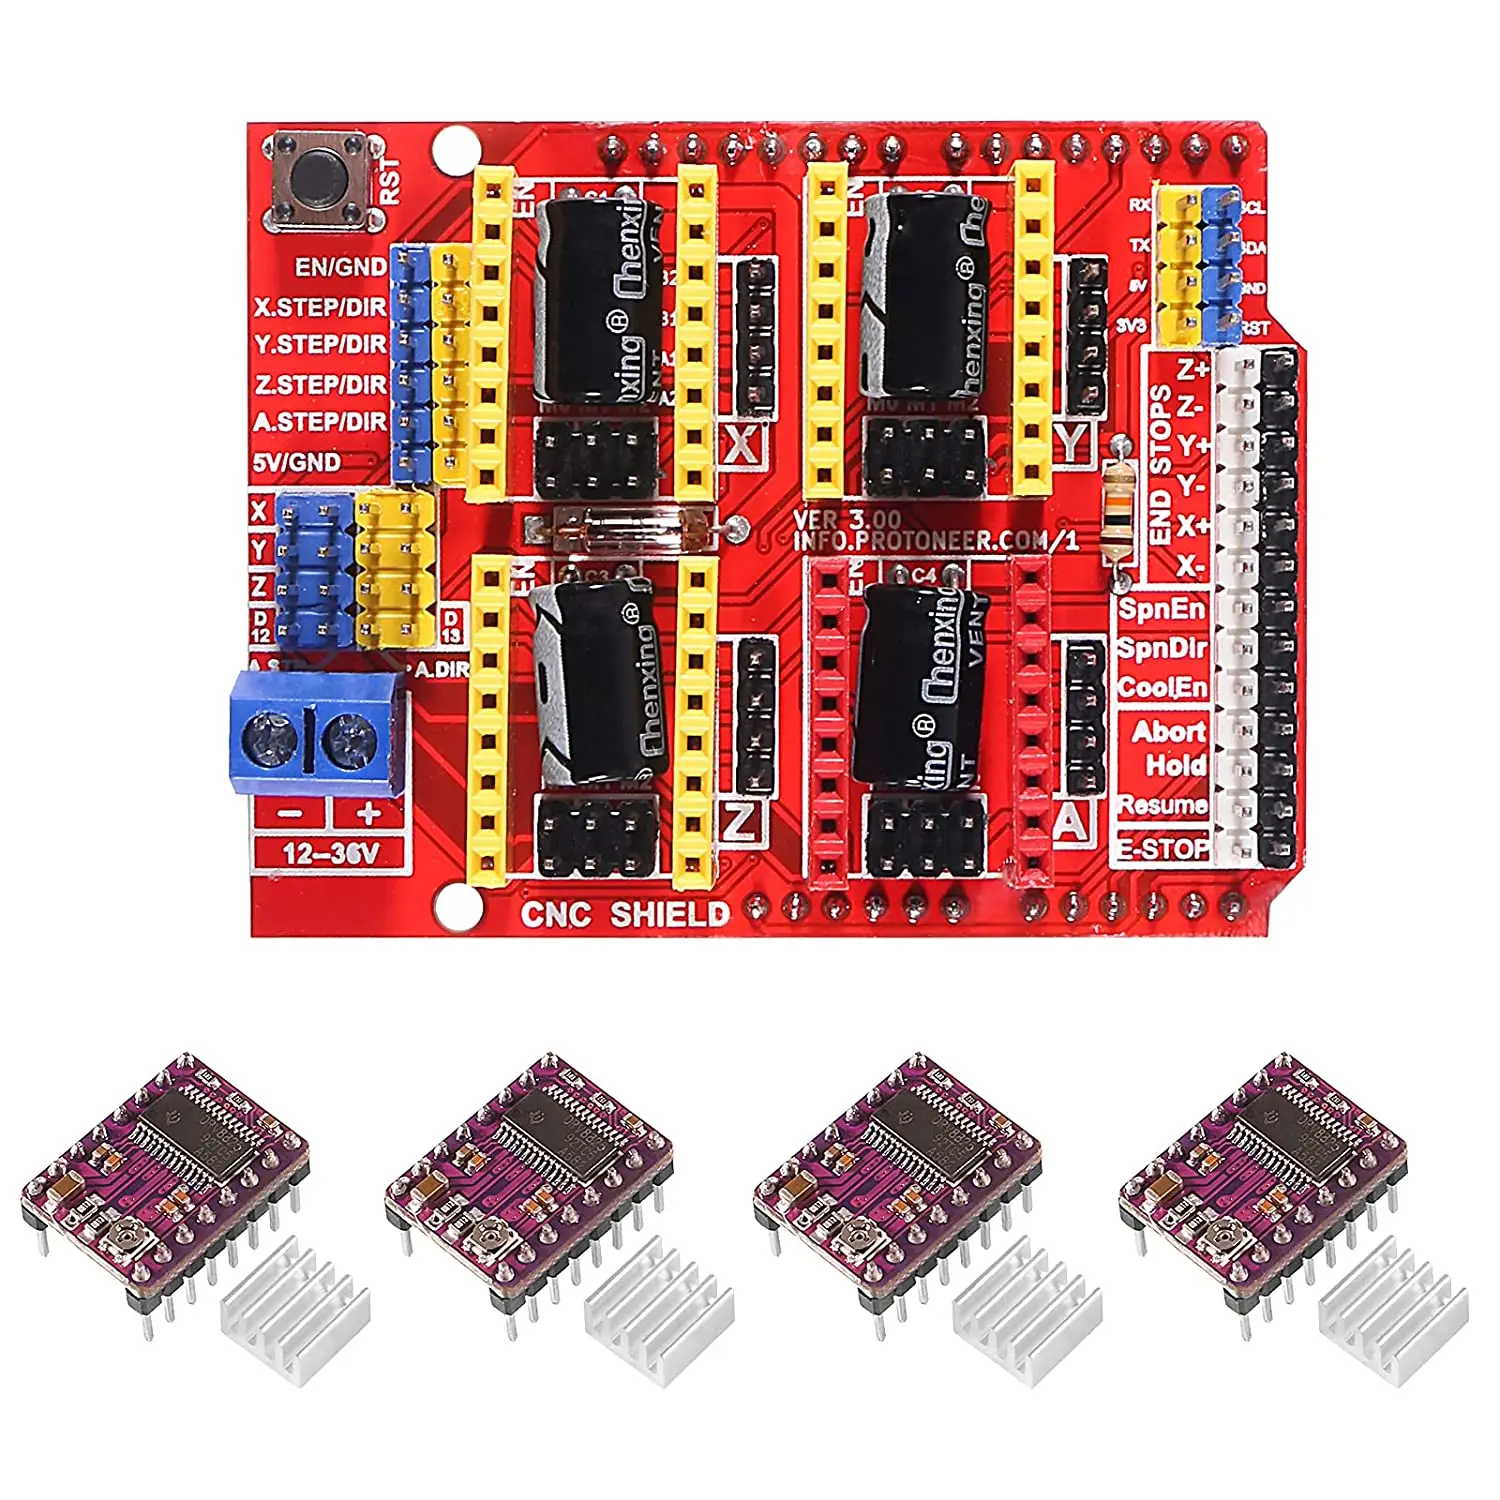 3D Printer CNC Shield Expansion Board with 4pcs DRV8825 Stepstick Stepper Motor Driver Module for 3D Printer RepRap RAMPS 1.4 lcd1602 lcd 1602 2004a 12864 lcd module hd44780 splc780d controller with pcf8574t i2c iic expansion board module